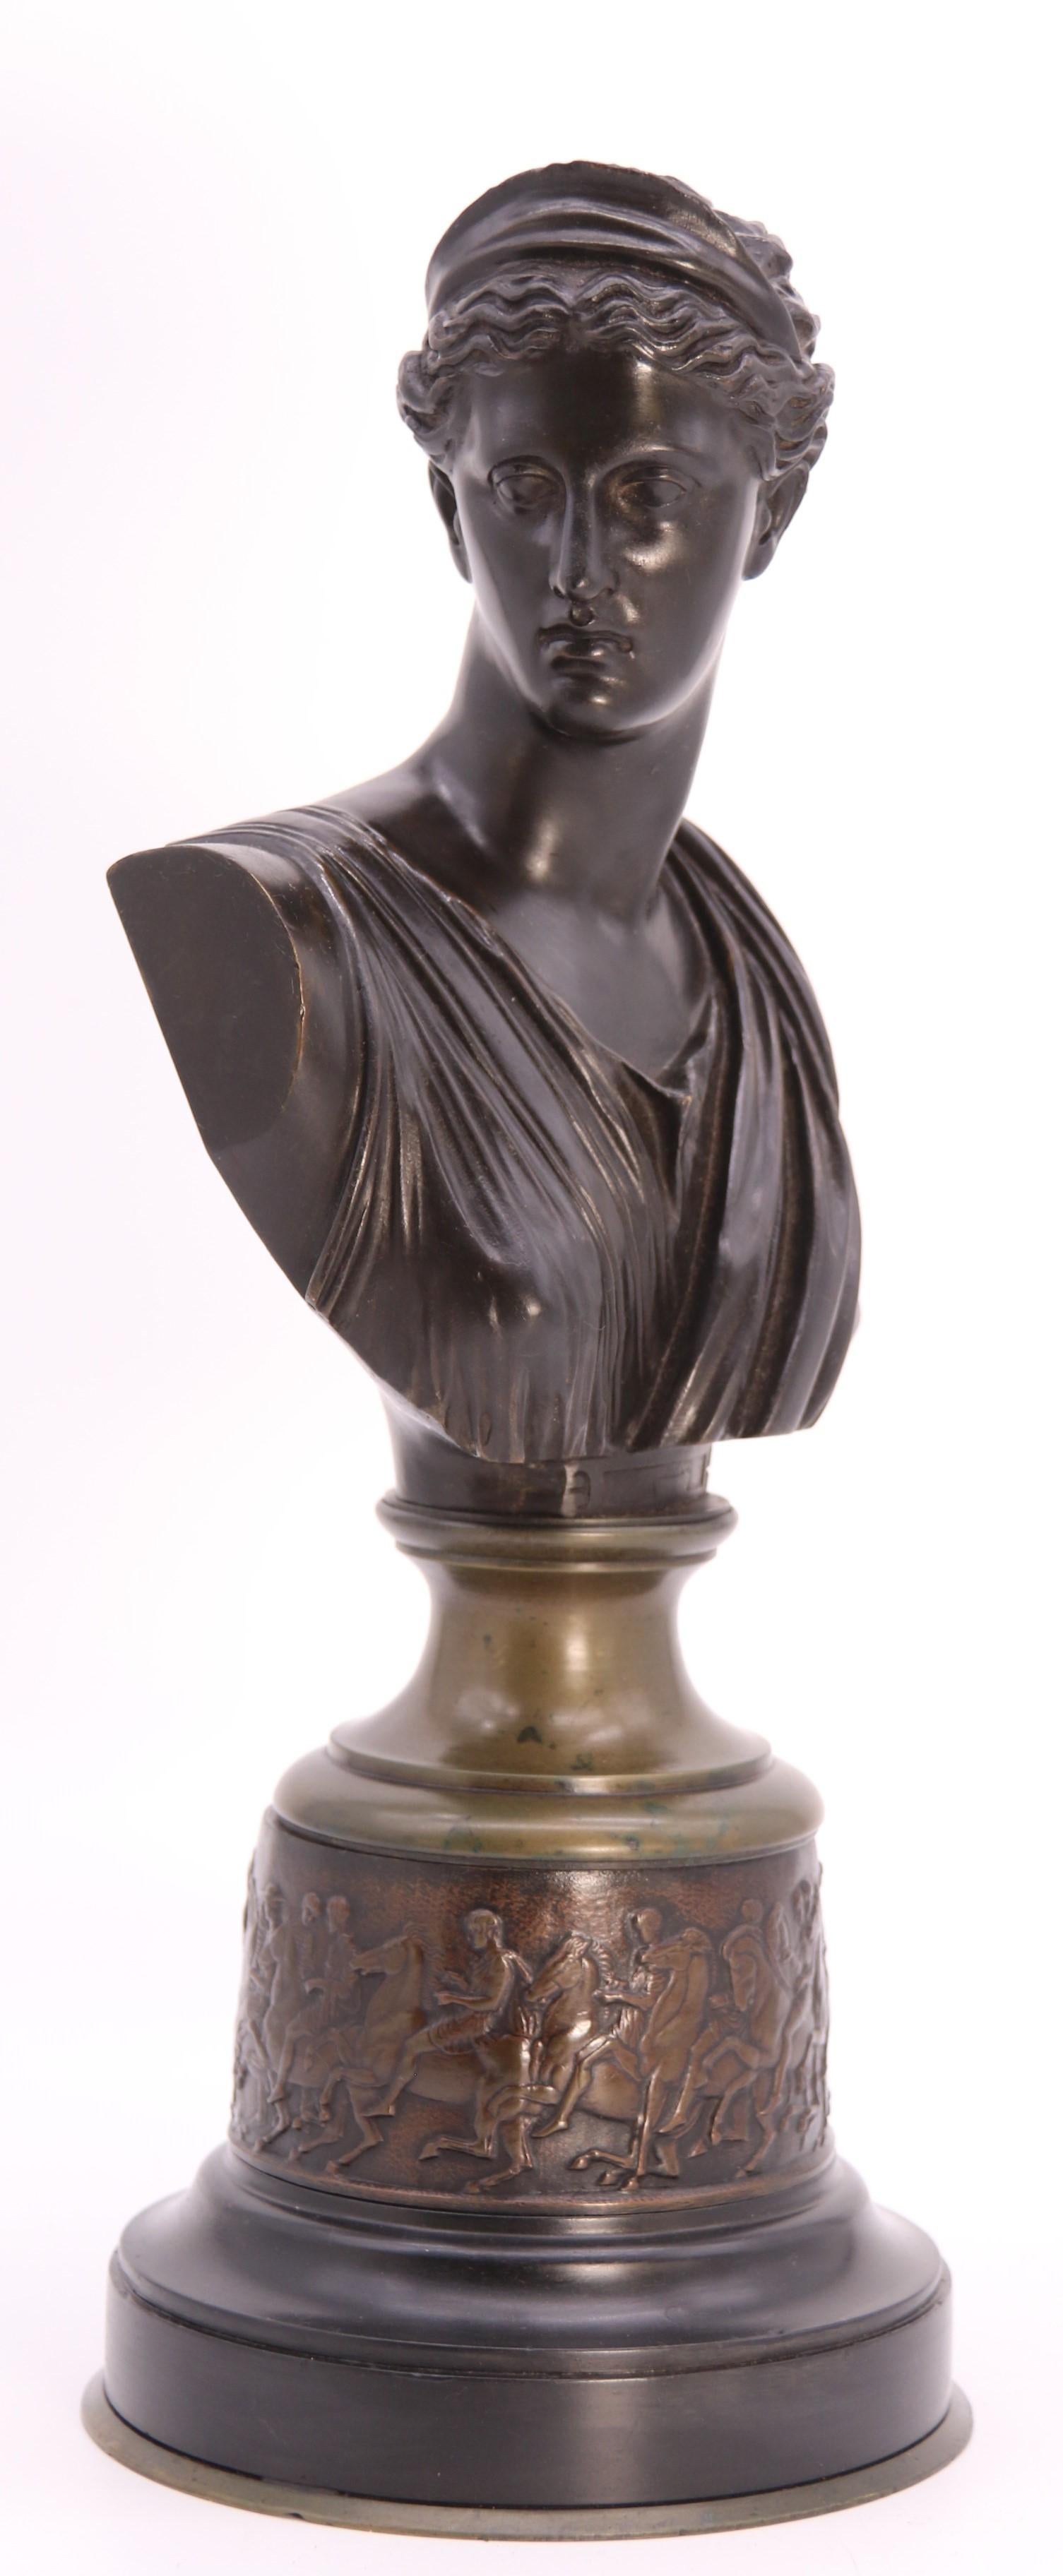 This superb Grand Tour bronze study portrays a bust of Diana of Versailles or Diana the Huntress, considered in Roman and Hellenistic mythology as goddess and patroness of countryside, nature, hunters, wildlife and childbirth. This fine example is